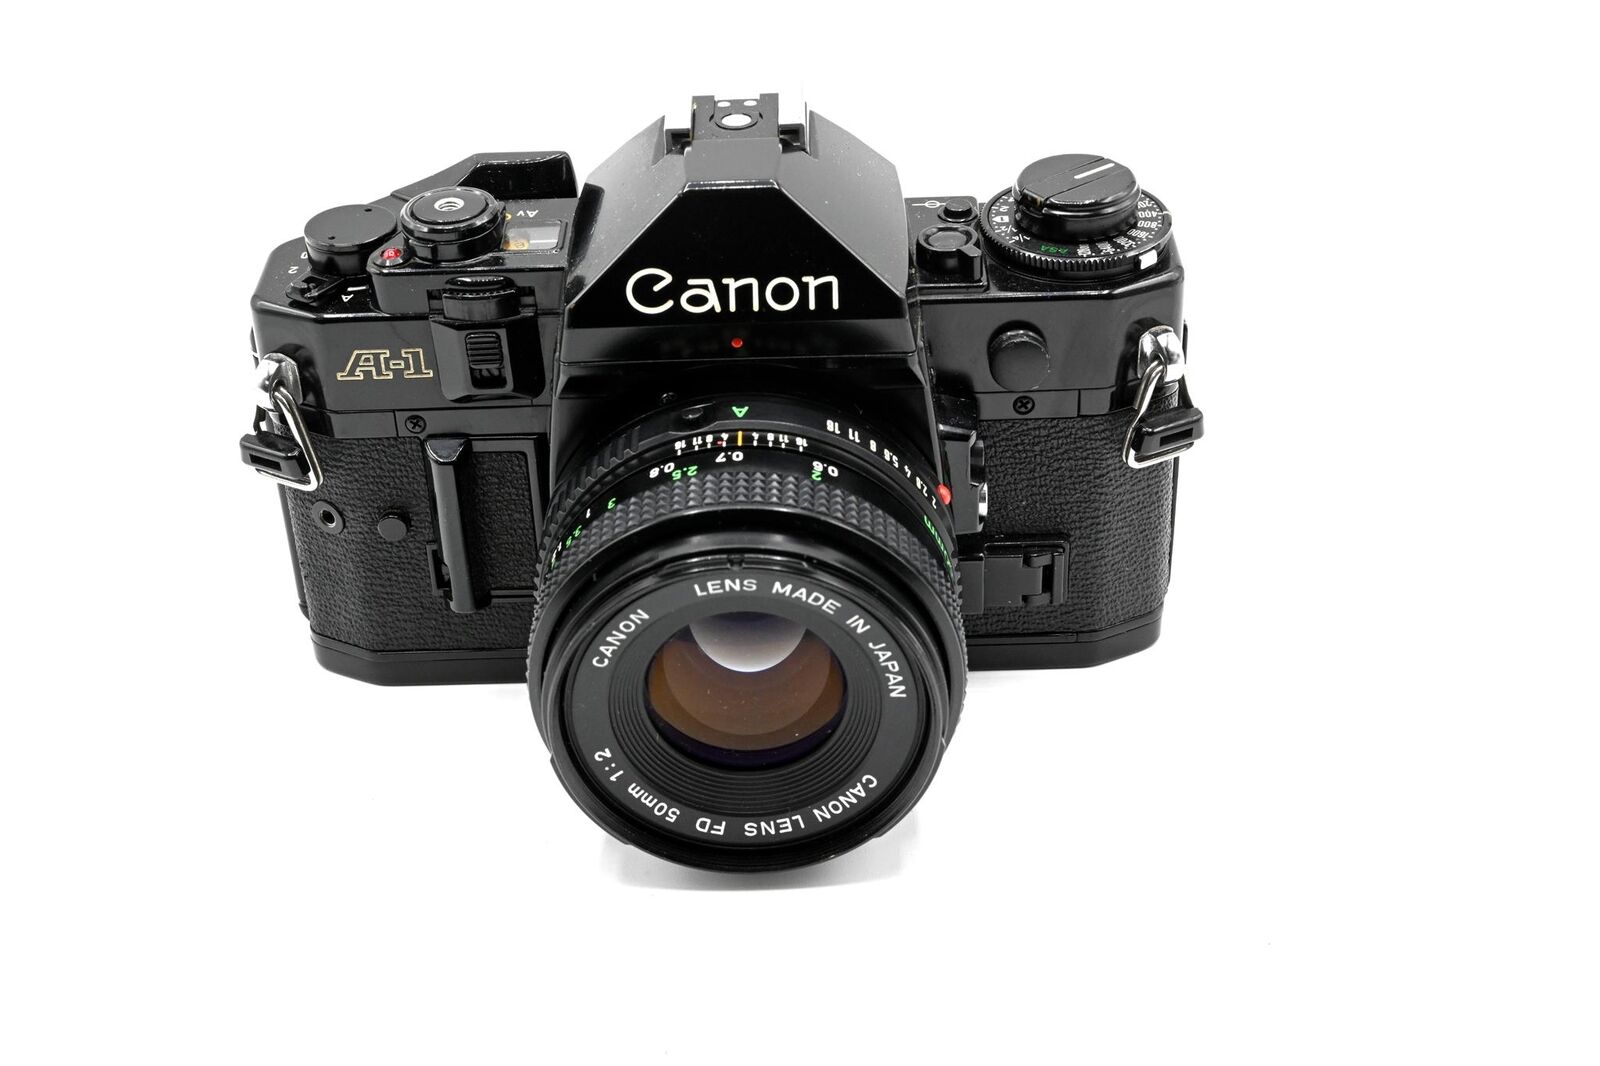 Canon A-1 A1 Film Camera with Canon 50mm f/1.8 or f/2.0 Lens - Very Good